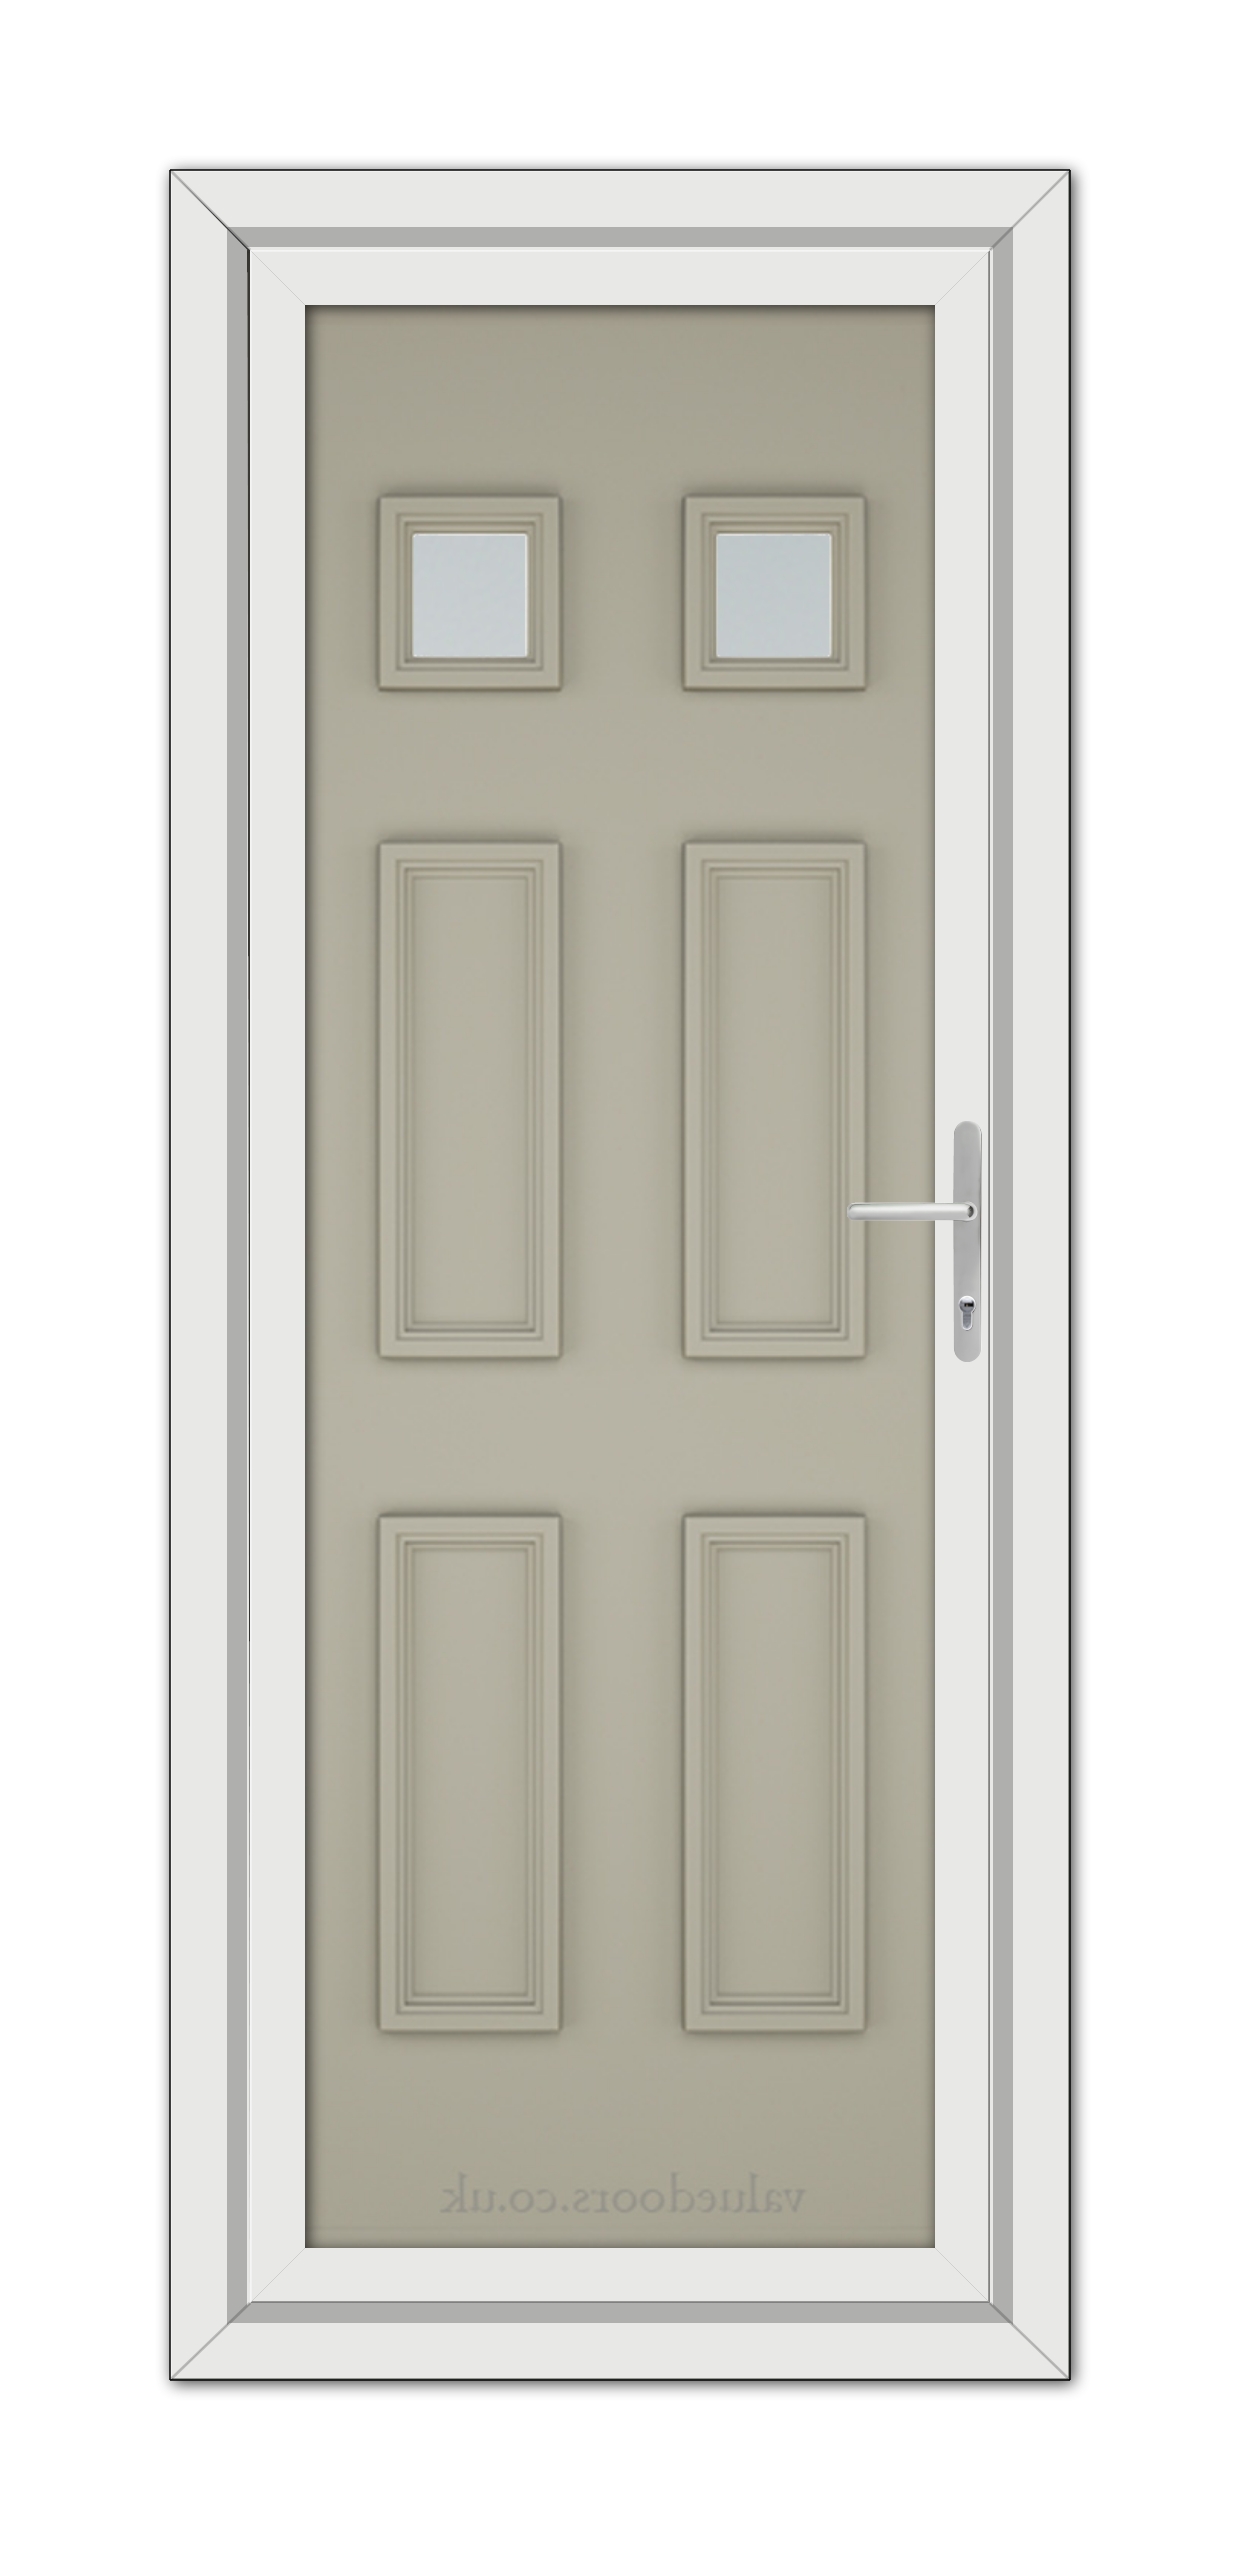 A modern Pebble Grey Windsor uPVC door with six rectangular panels and three small square windows at the top, fitted within a white frame.